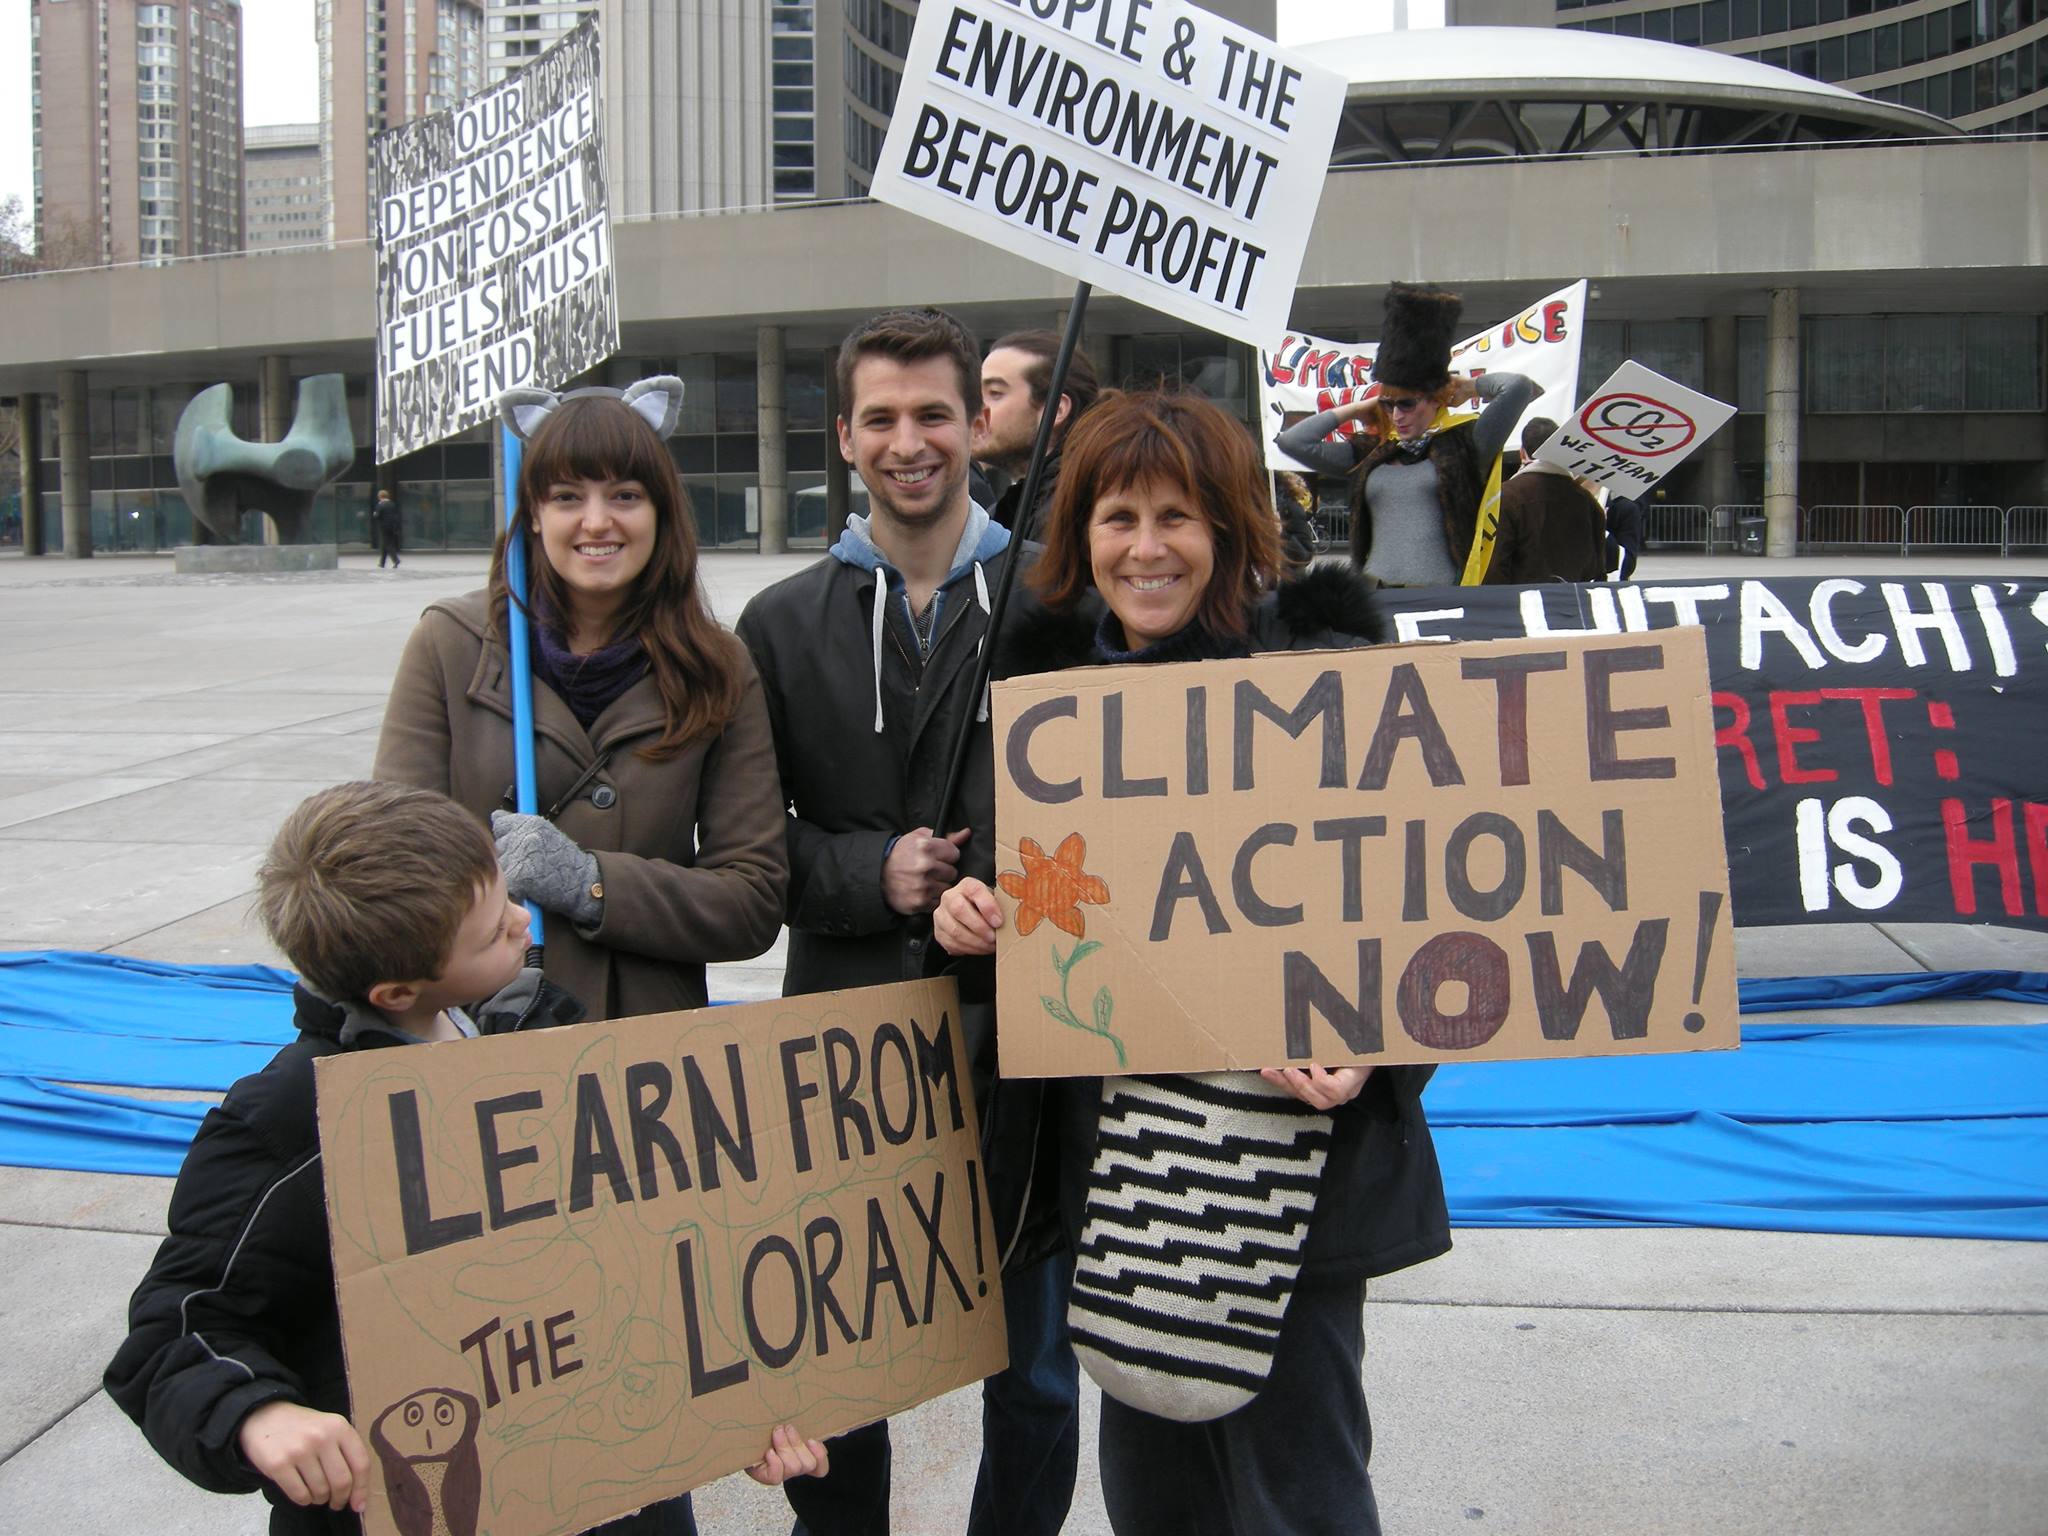 Smiling protesters carry signs that say "Climate Action Now", "Learn From The Lorax" "Our Dependence on Fossil Fuels Must End", "People & the Environment Before Profit"